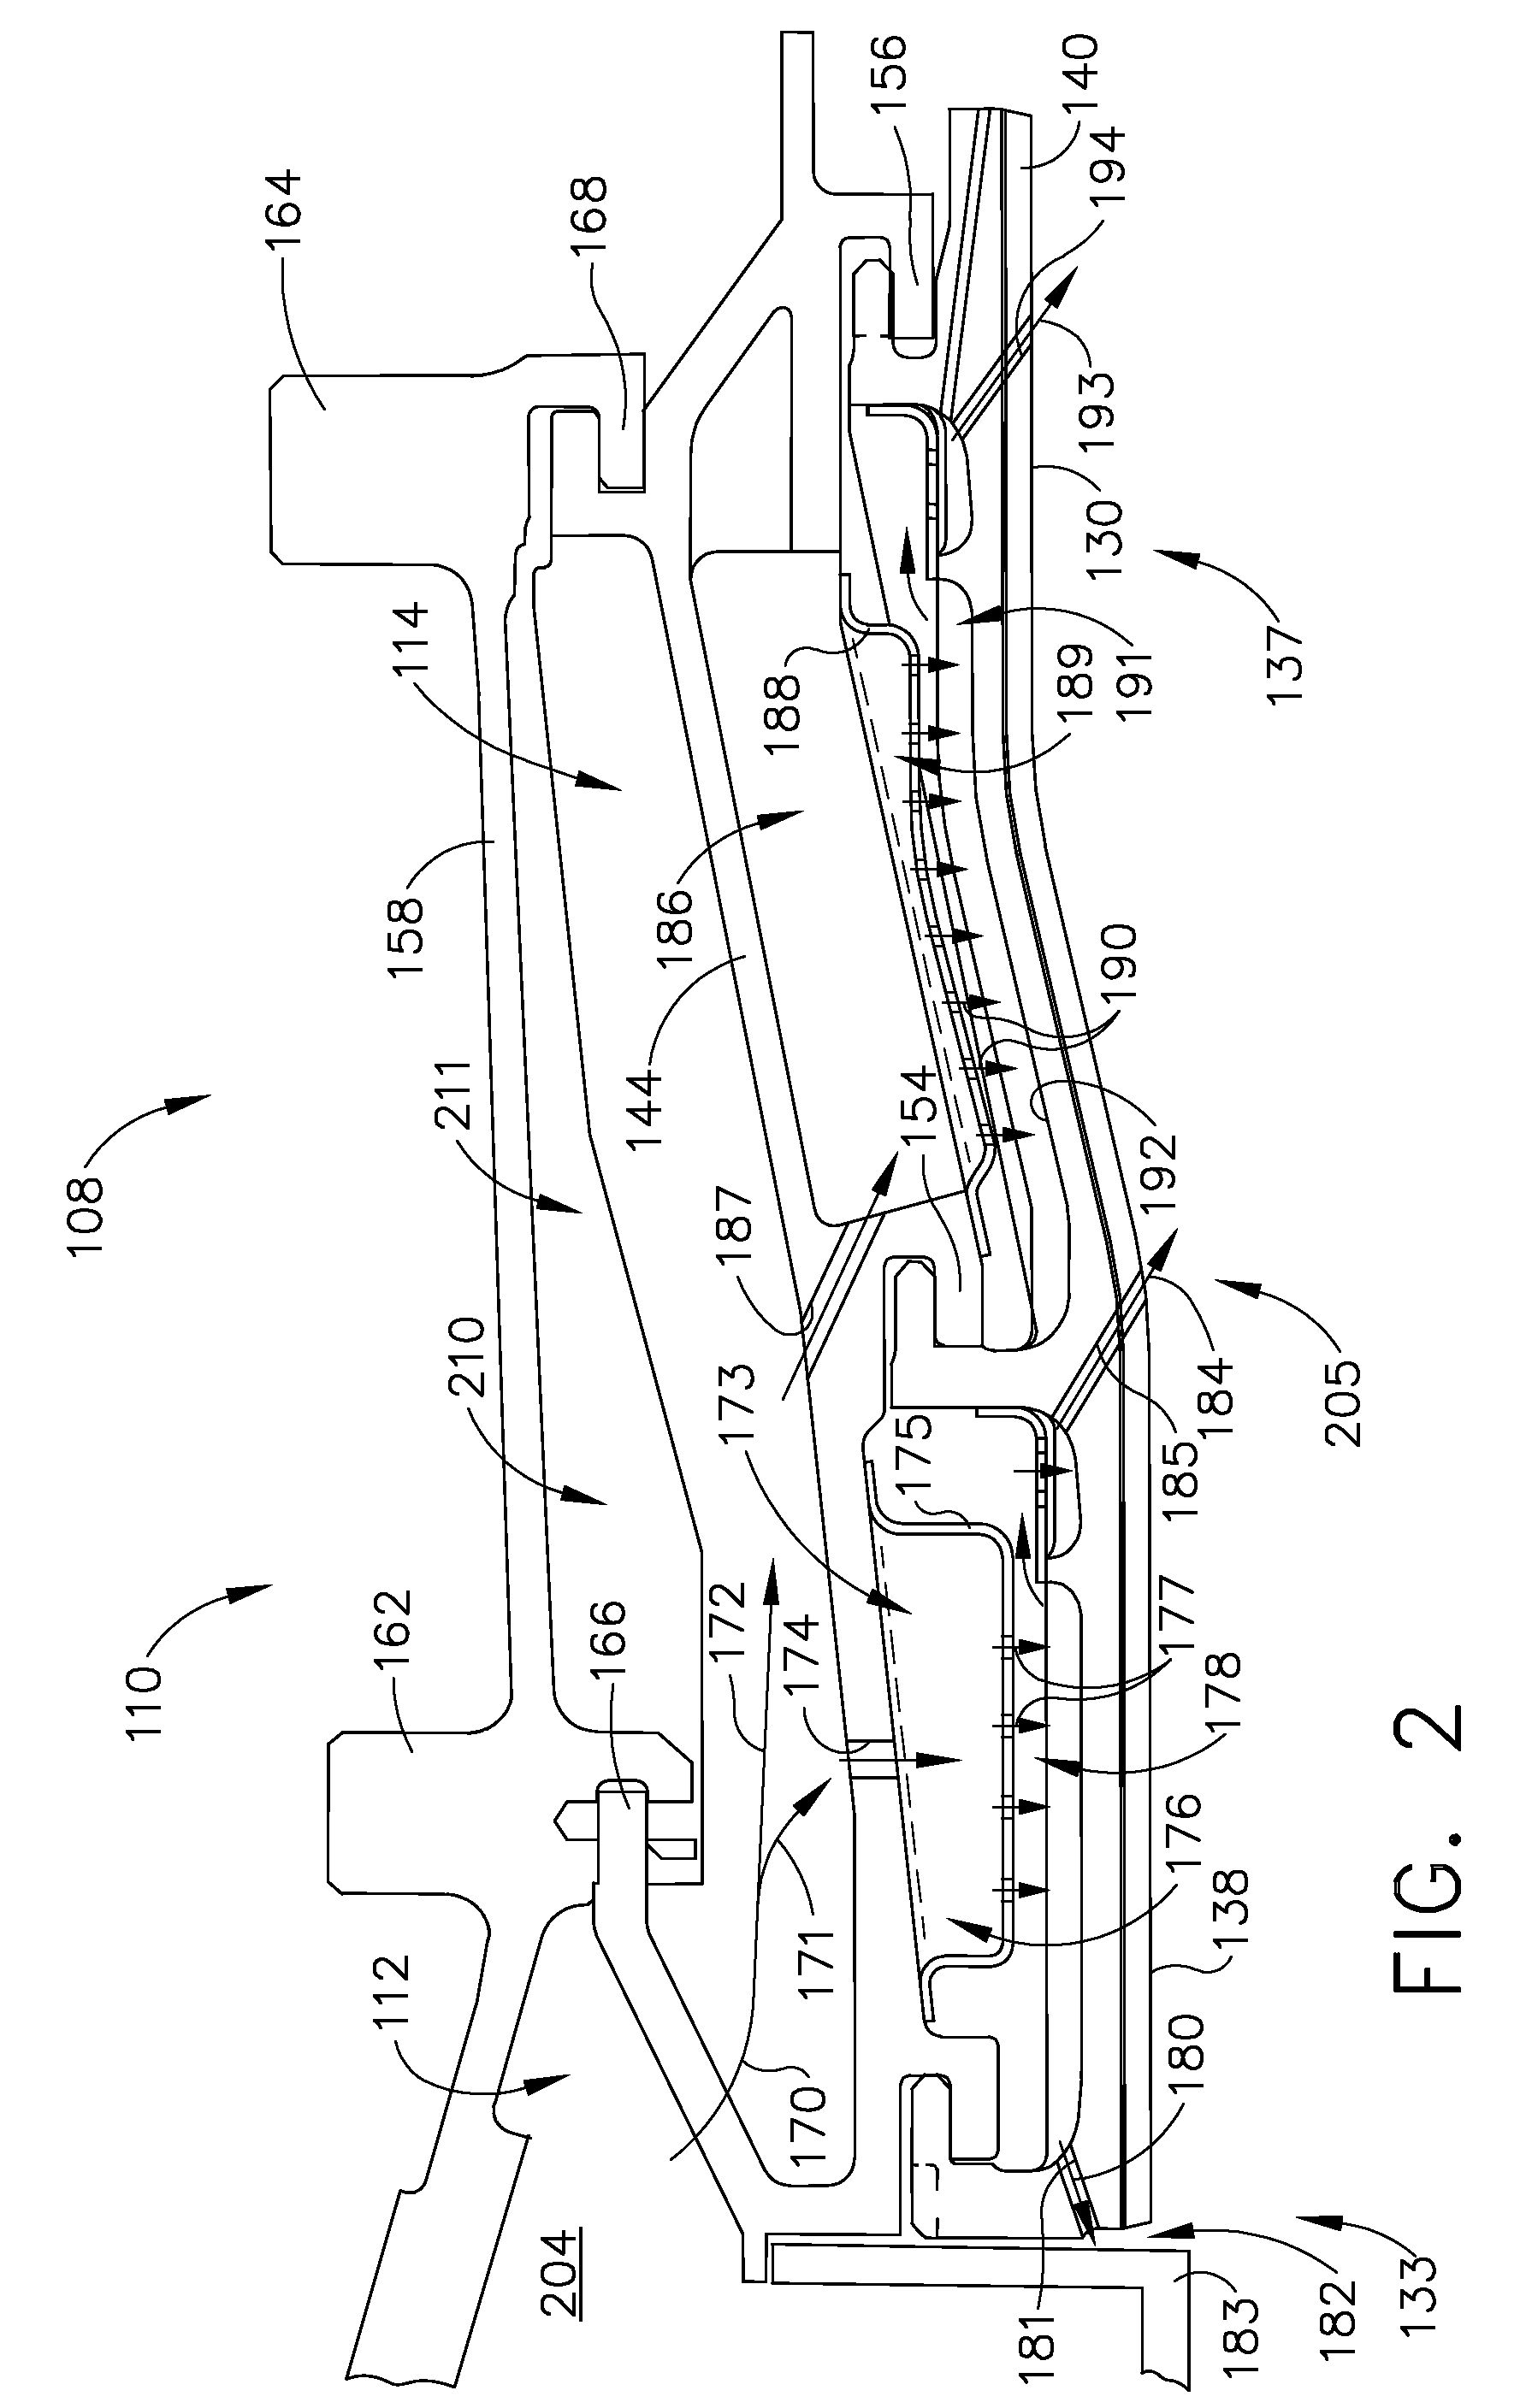 Method and system to facilitate enhanced local cooling of turbine engines